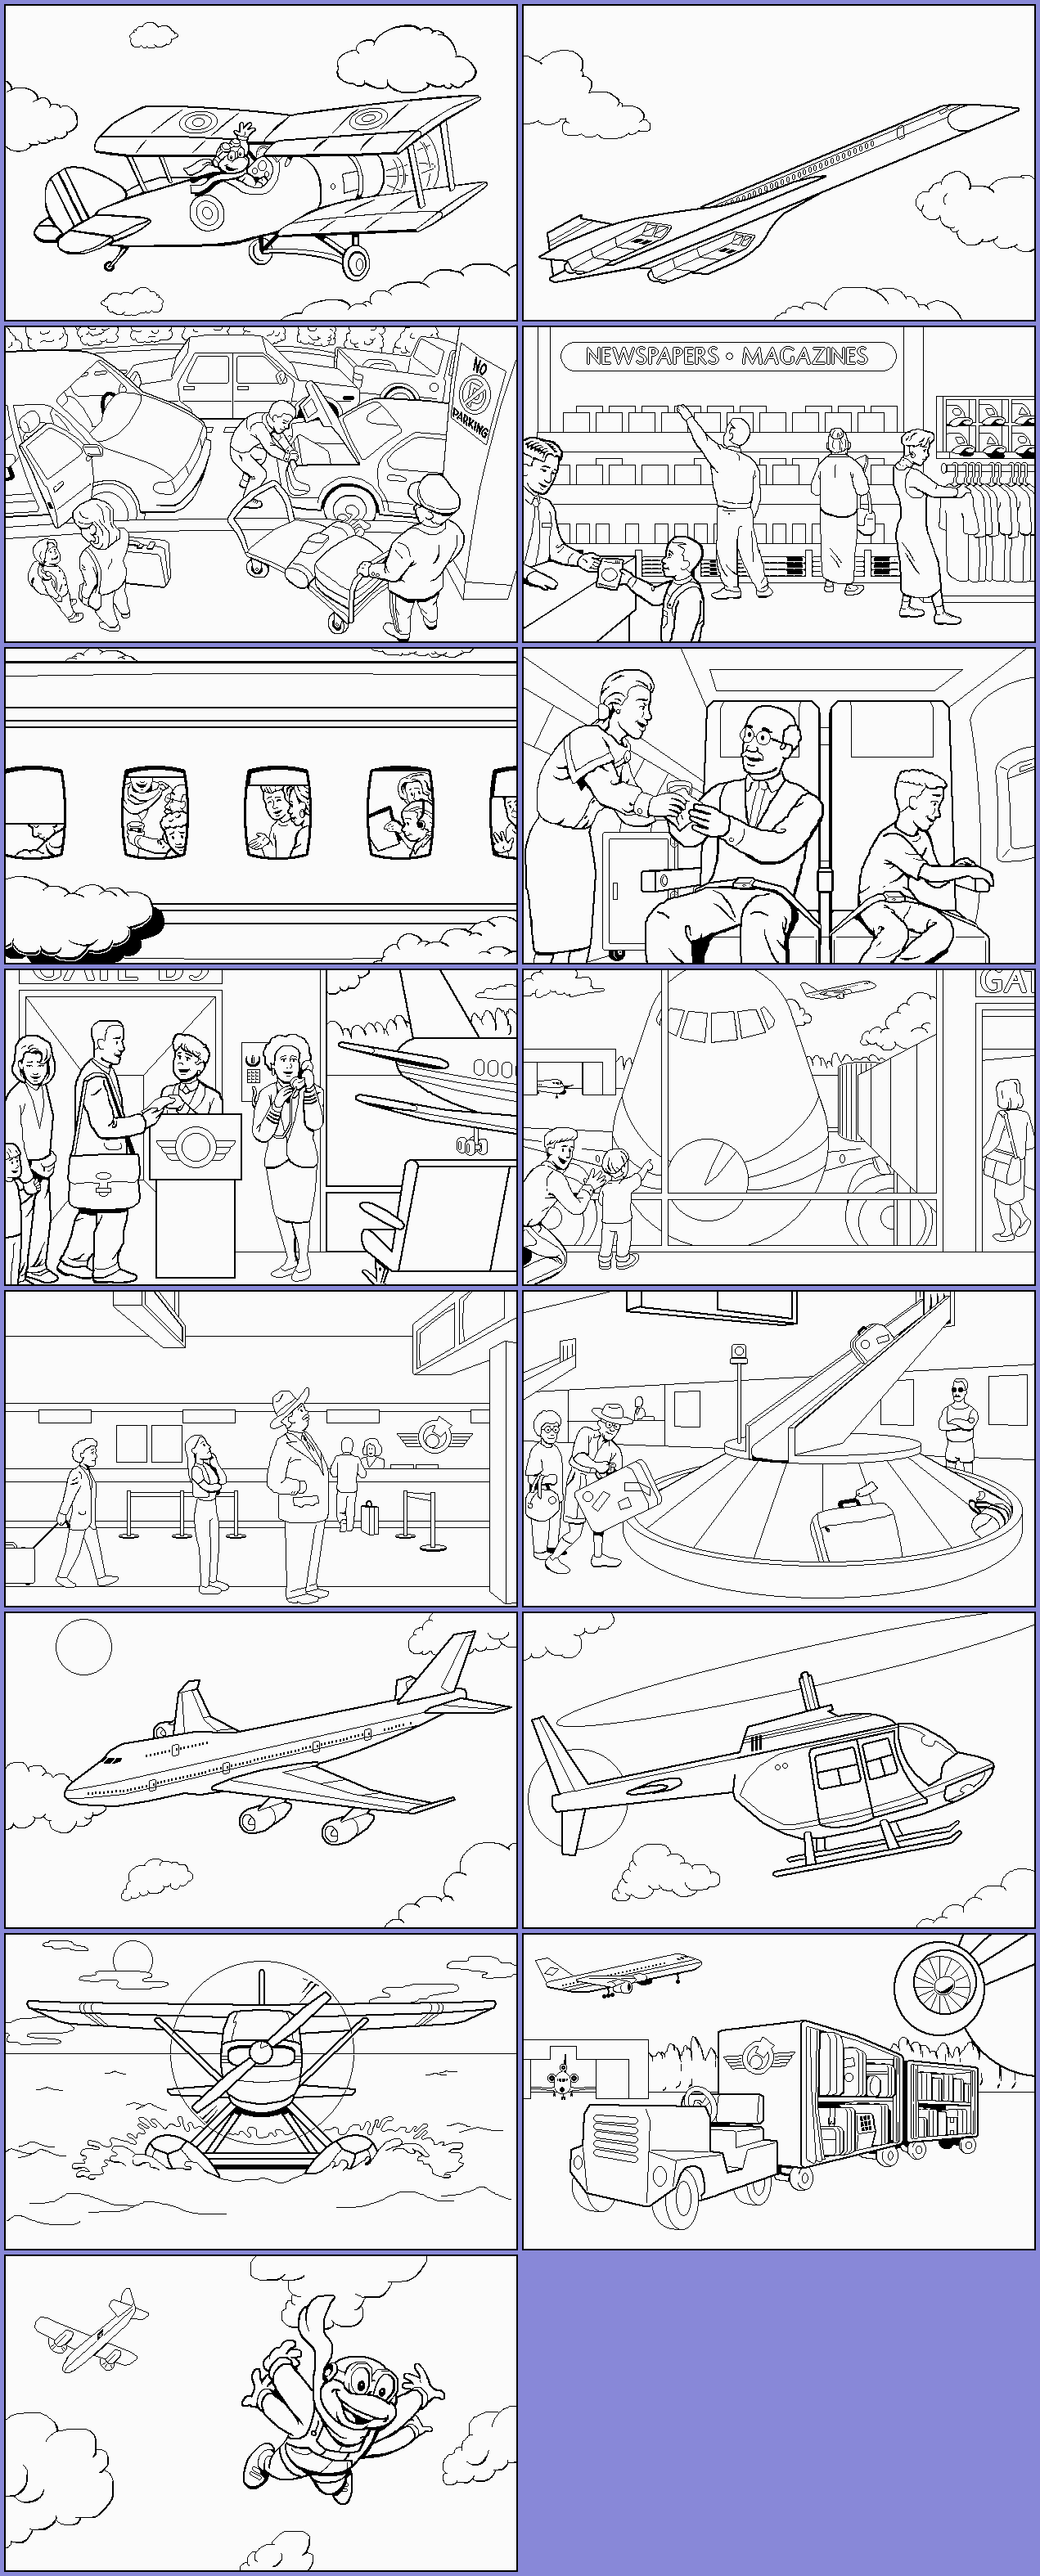 Let's Explore the Airport with Buzzy - Coloring Pages